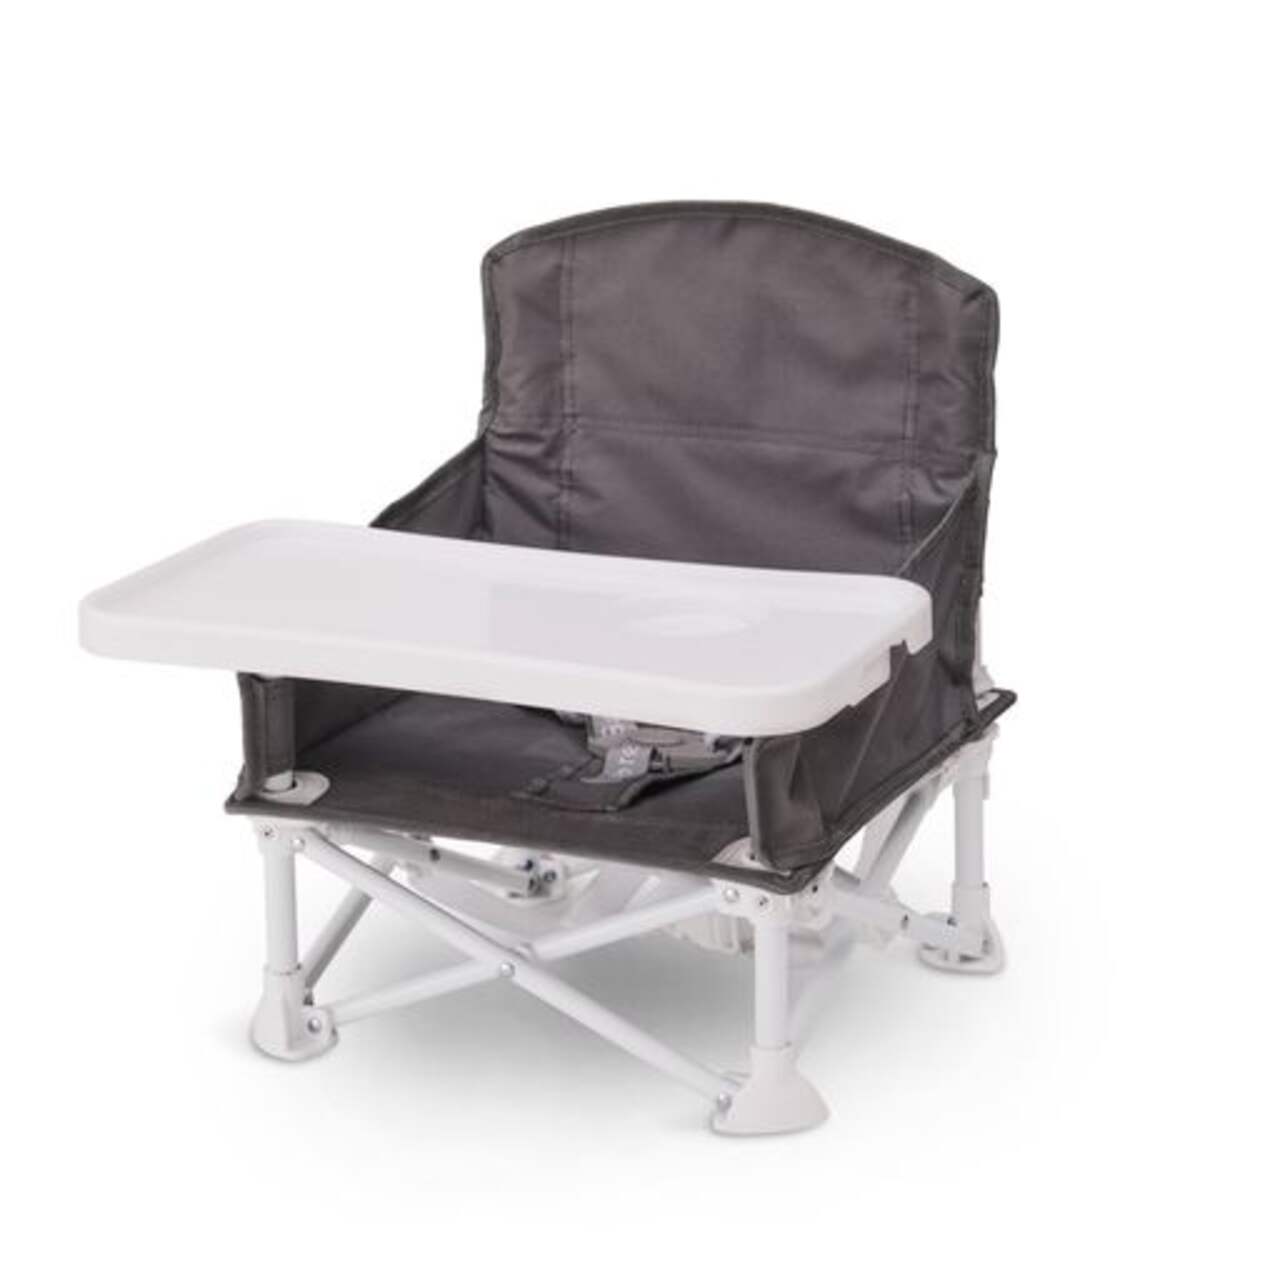 https://media-www.canadiantire.ca/product/automotive/car-care-accessories/child-travel-baby/0464965/regalo-my-chair-portable-booster-and-activity-chair-7193379c-d8f1-4298-a2c6-86b12316d2af.png?imdensity=1&imwidth=640&impolicy=mZoom